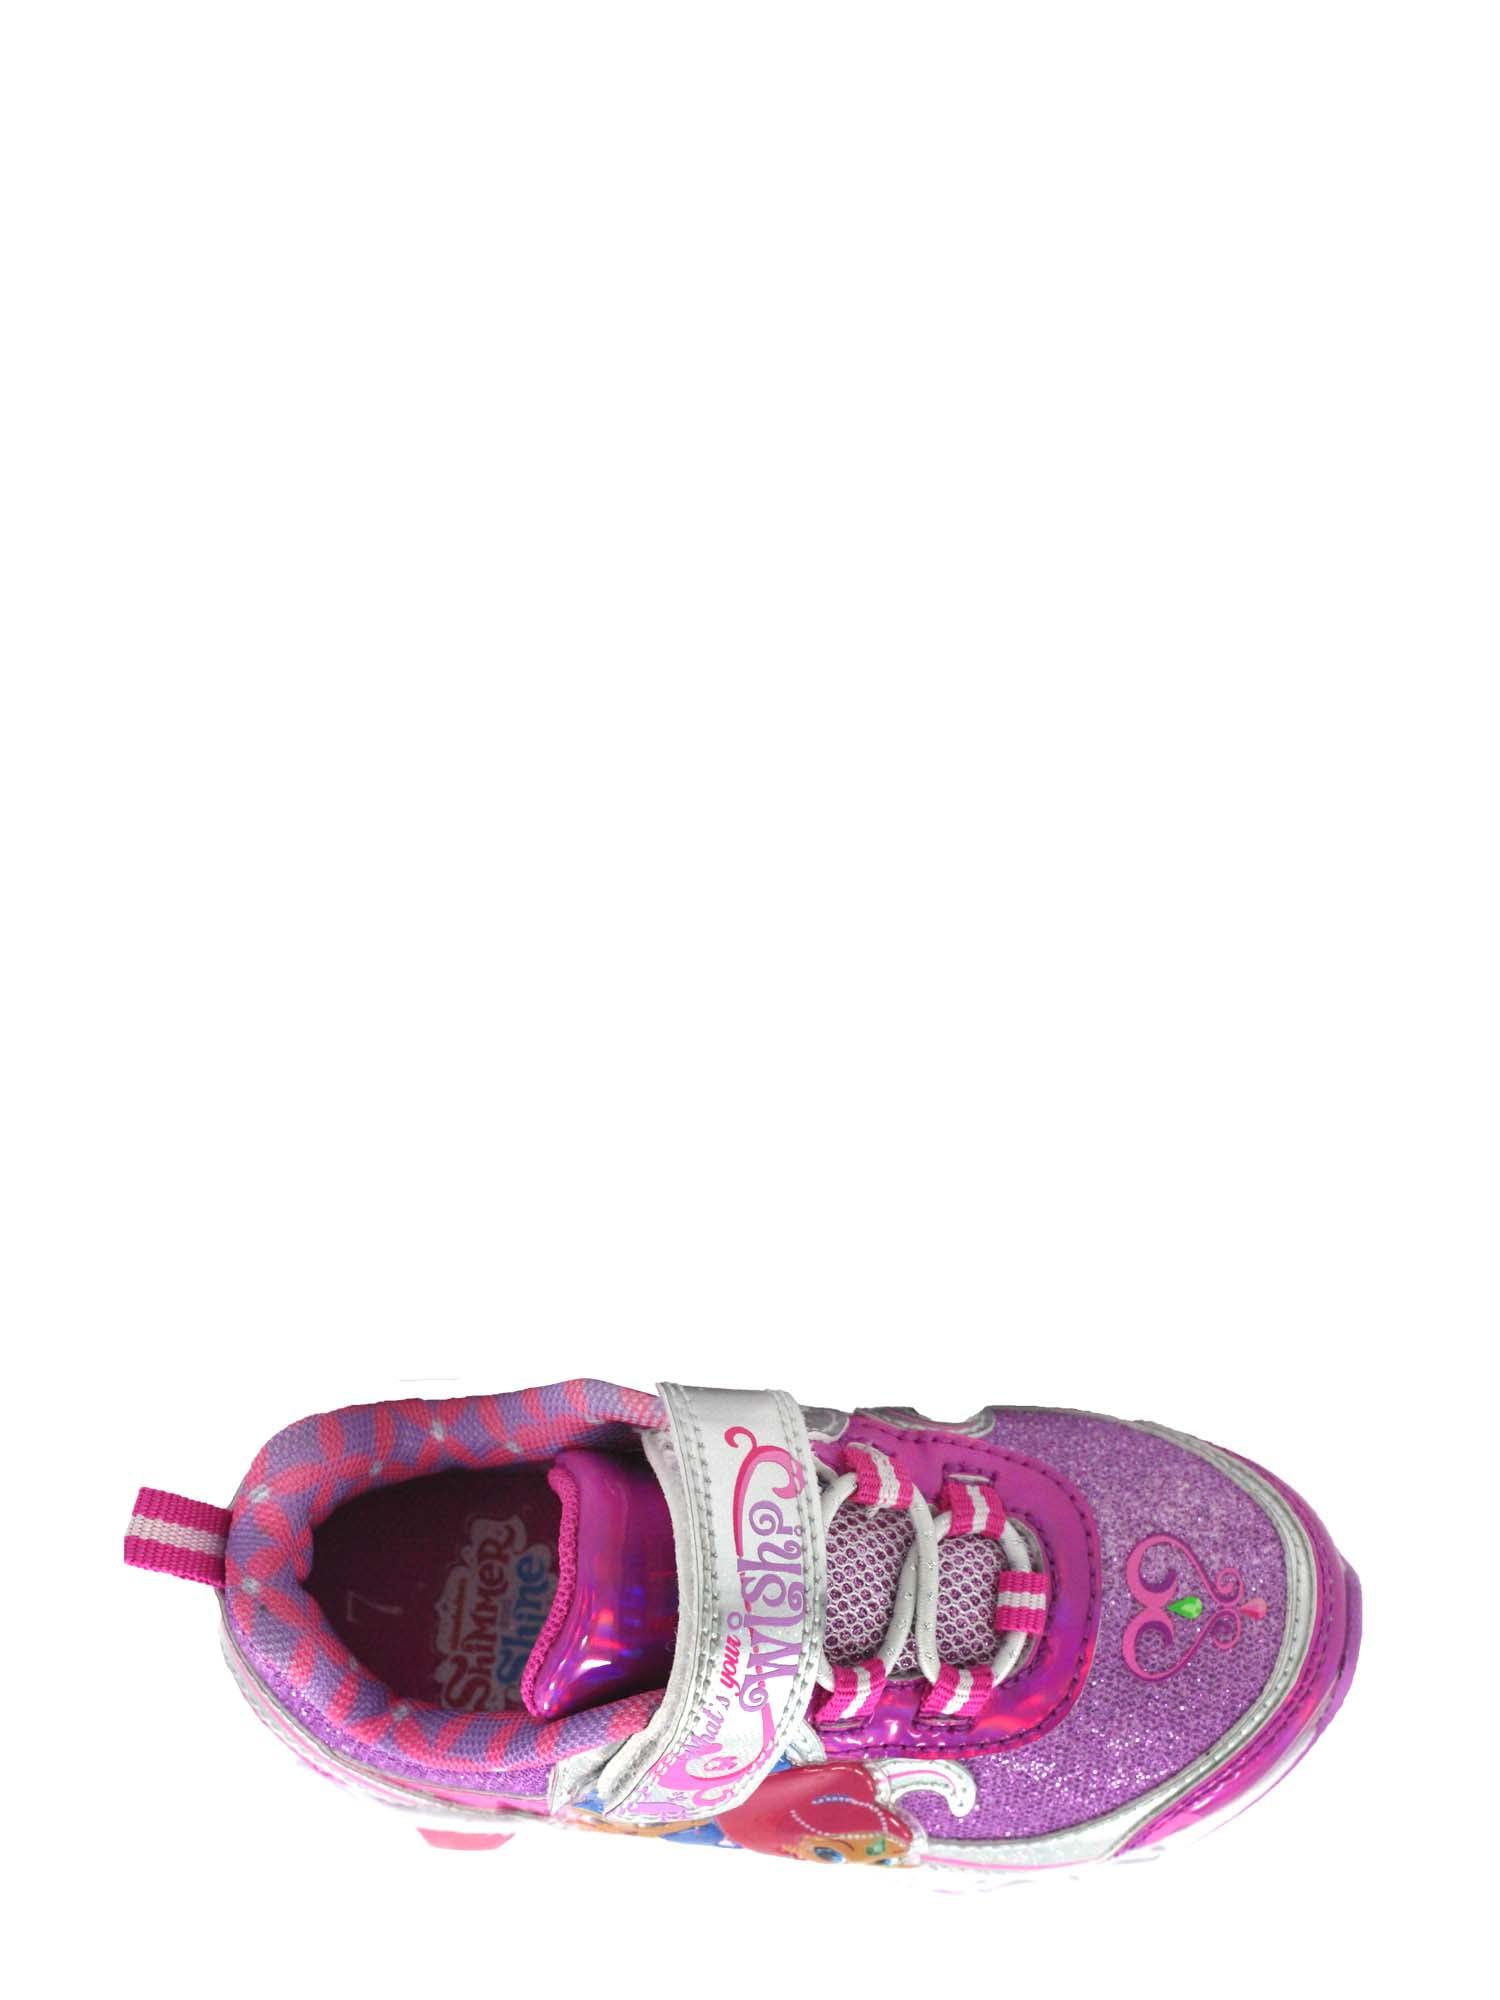 shimmer and shine shoes walmart